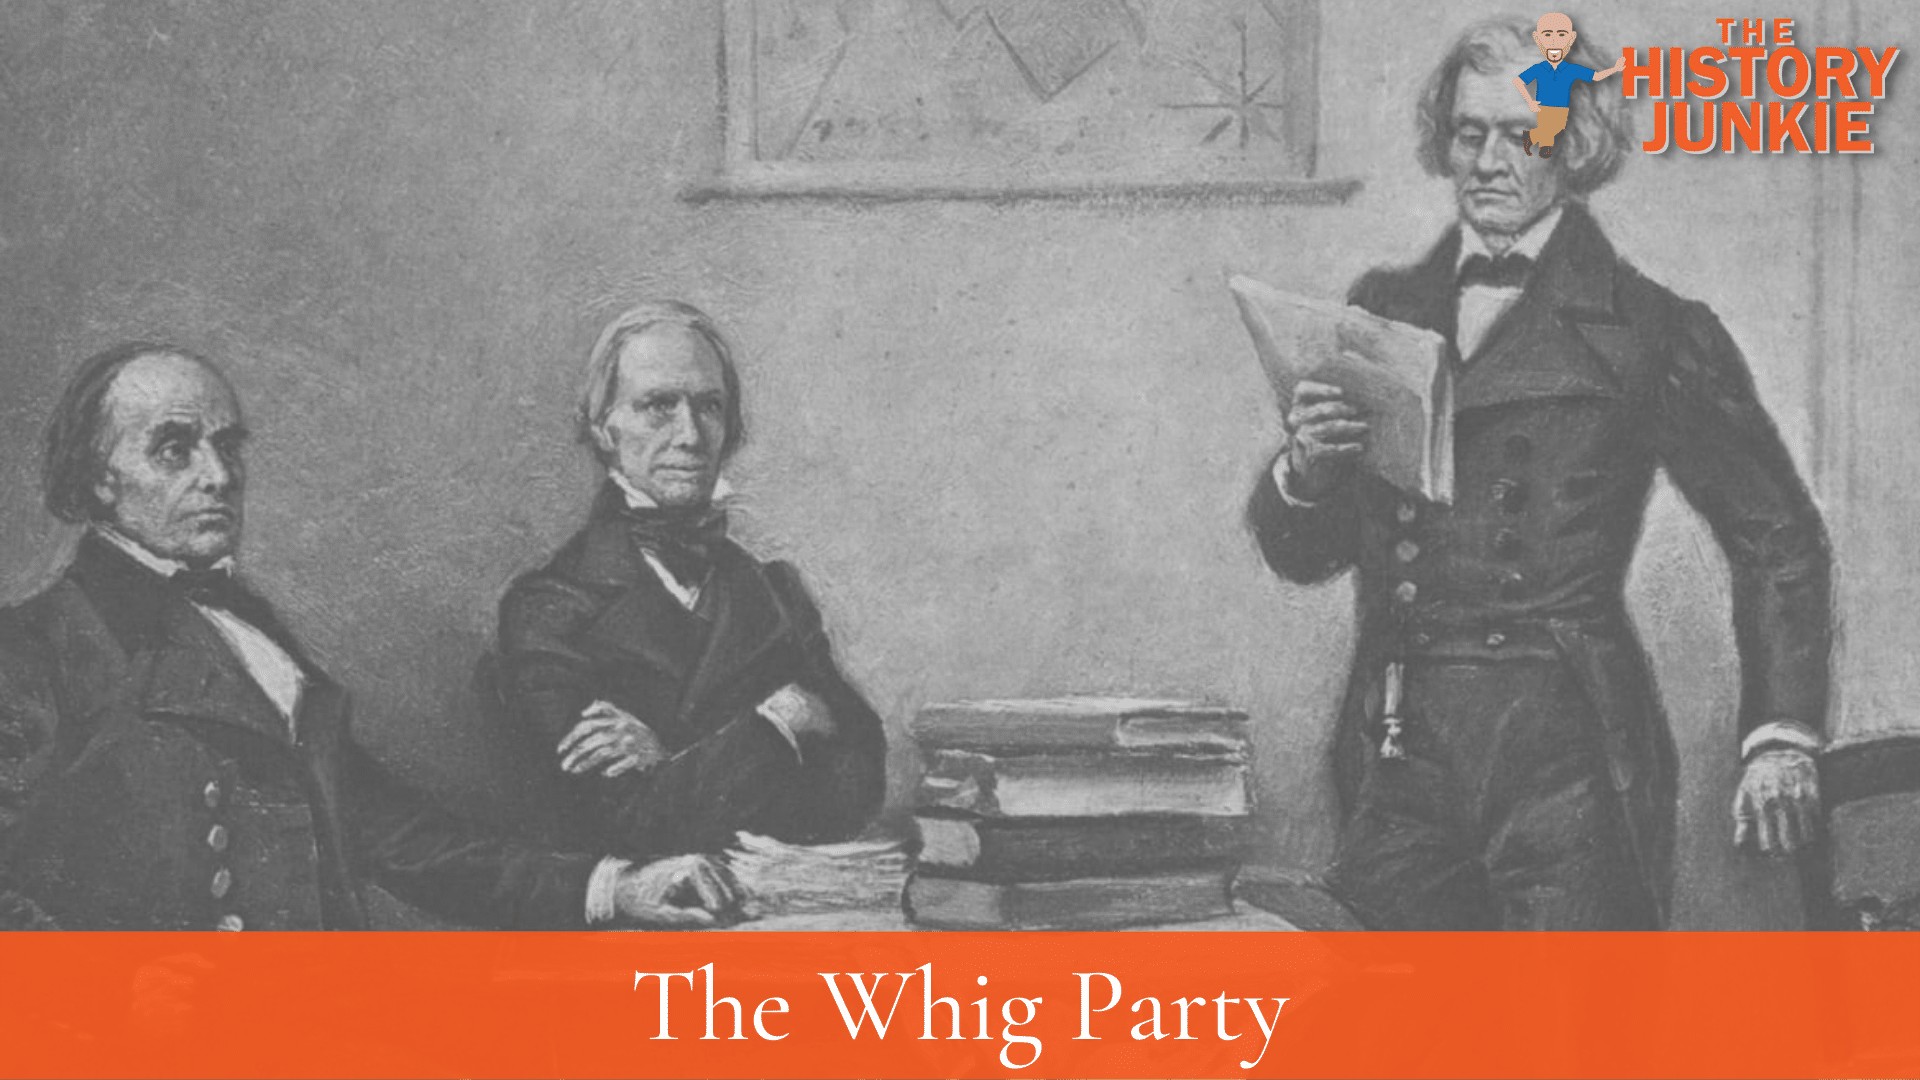 The Whig Party